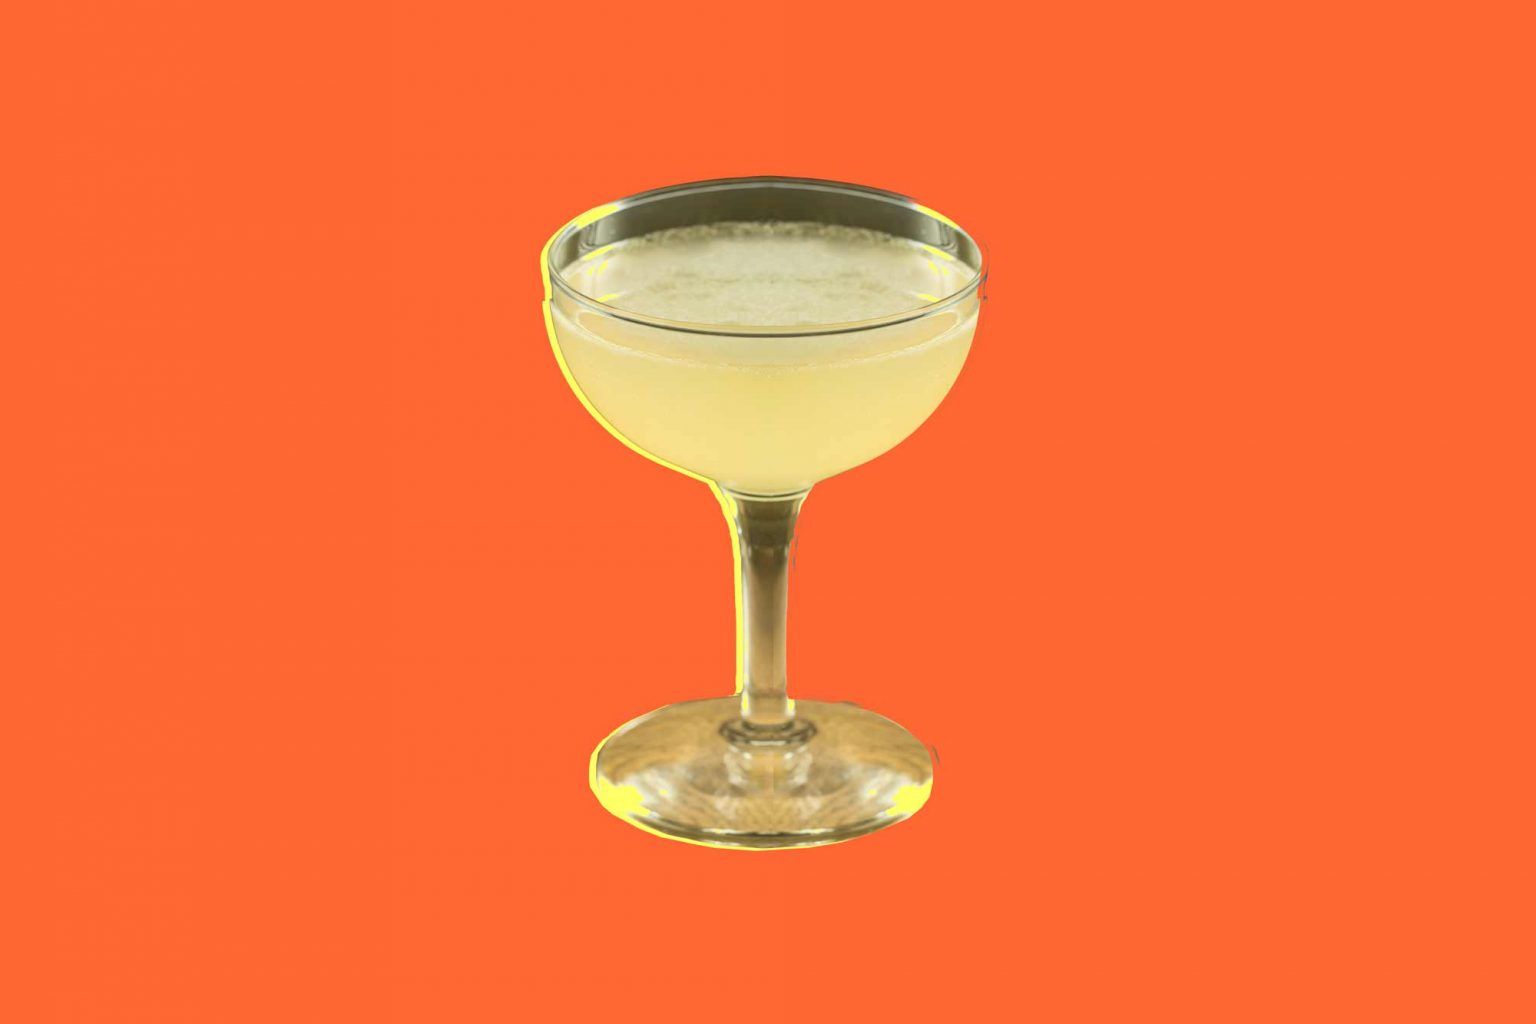 ‘No garnish can withstand the awesome power of the Nuclear Daiquiri.’